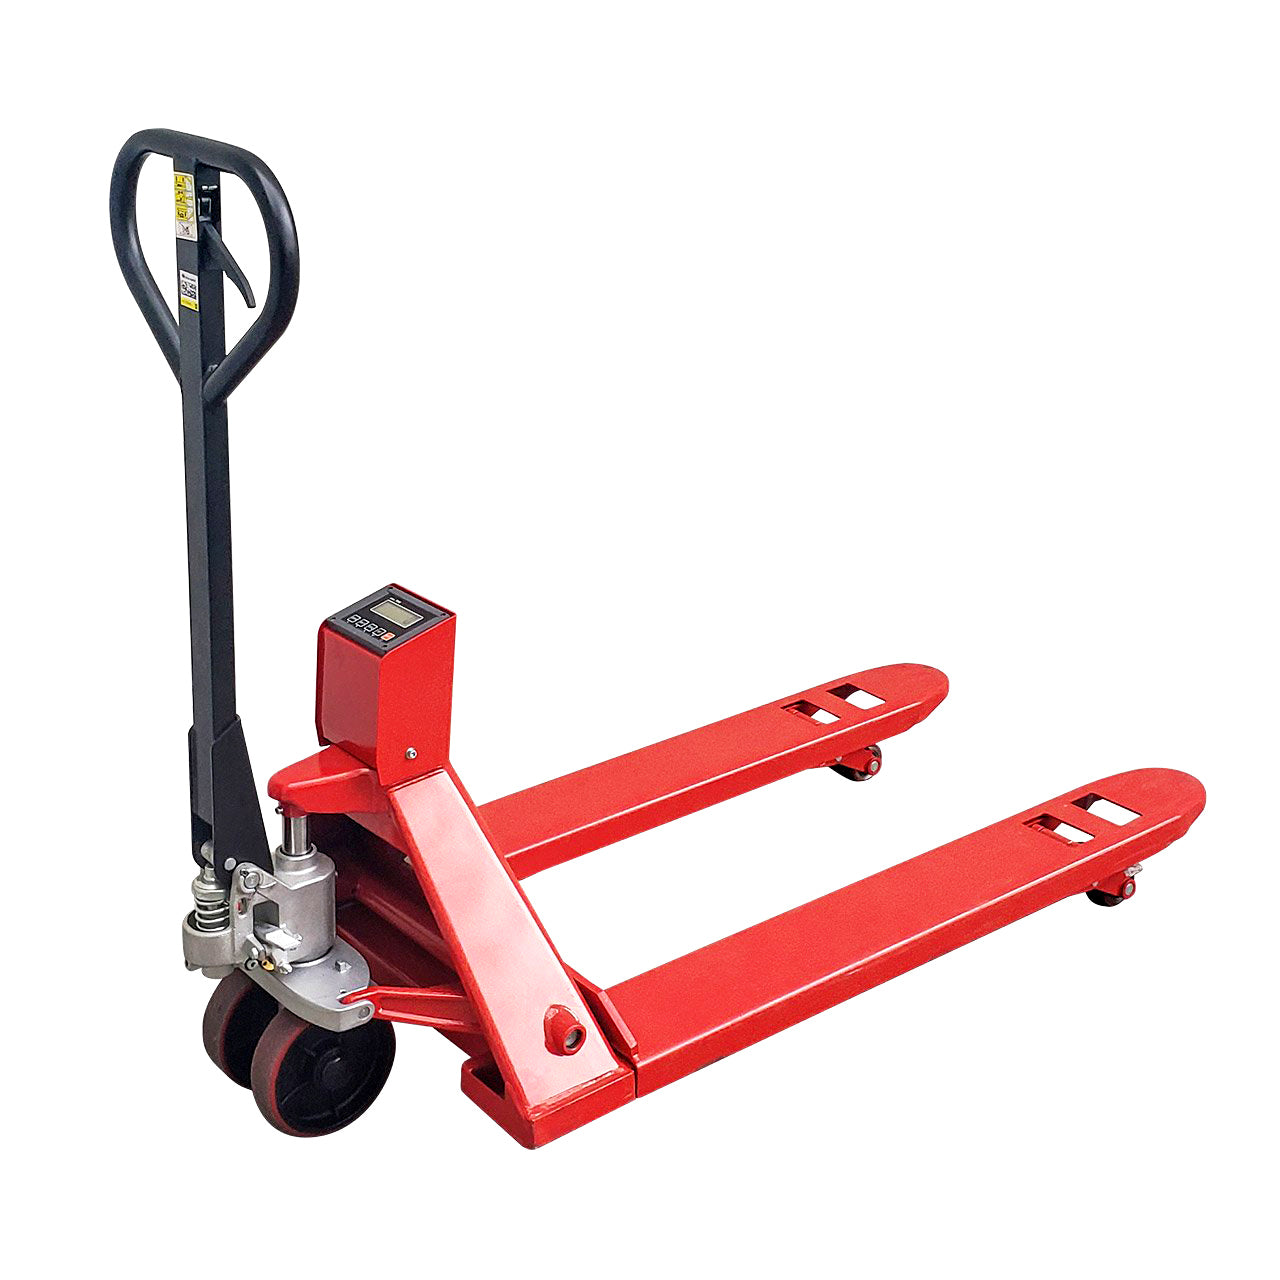 PEC Pallet Jack with Build-in Scale, 5000lbs Capacity, 48" Standard Fork, Fully Assembled for Heavy-Duty Industrial and Warehouse